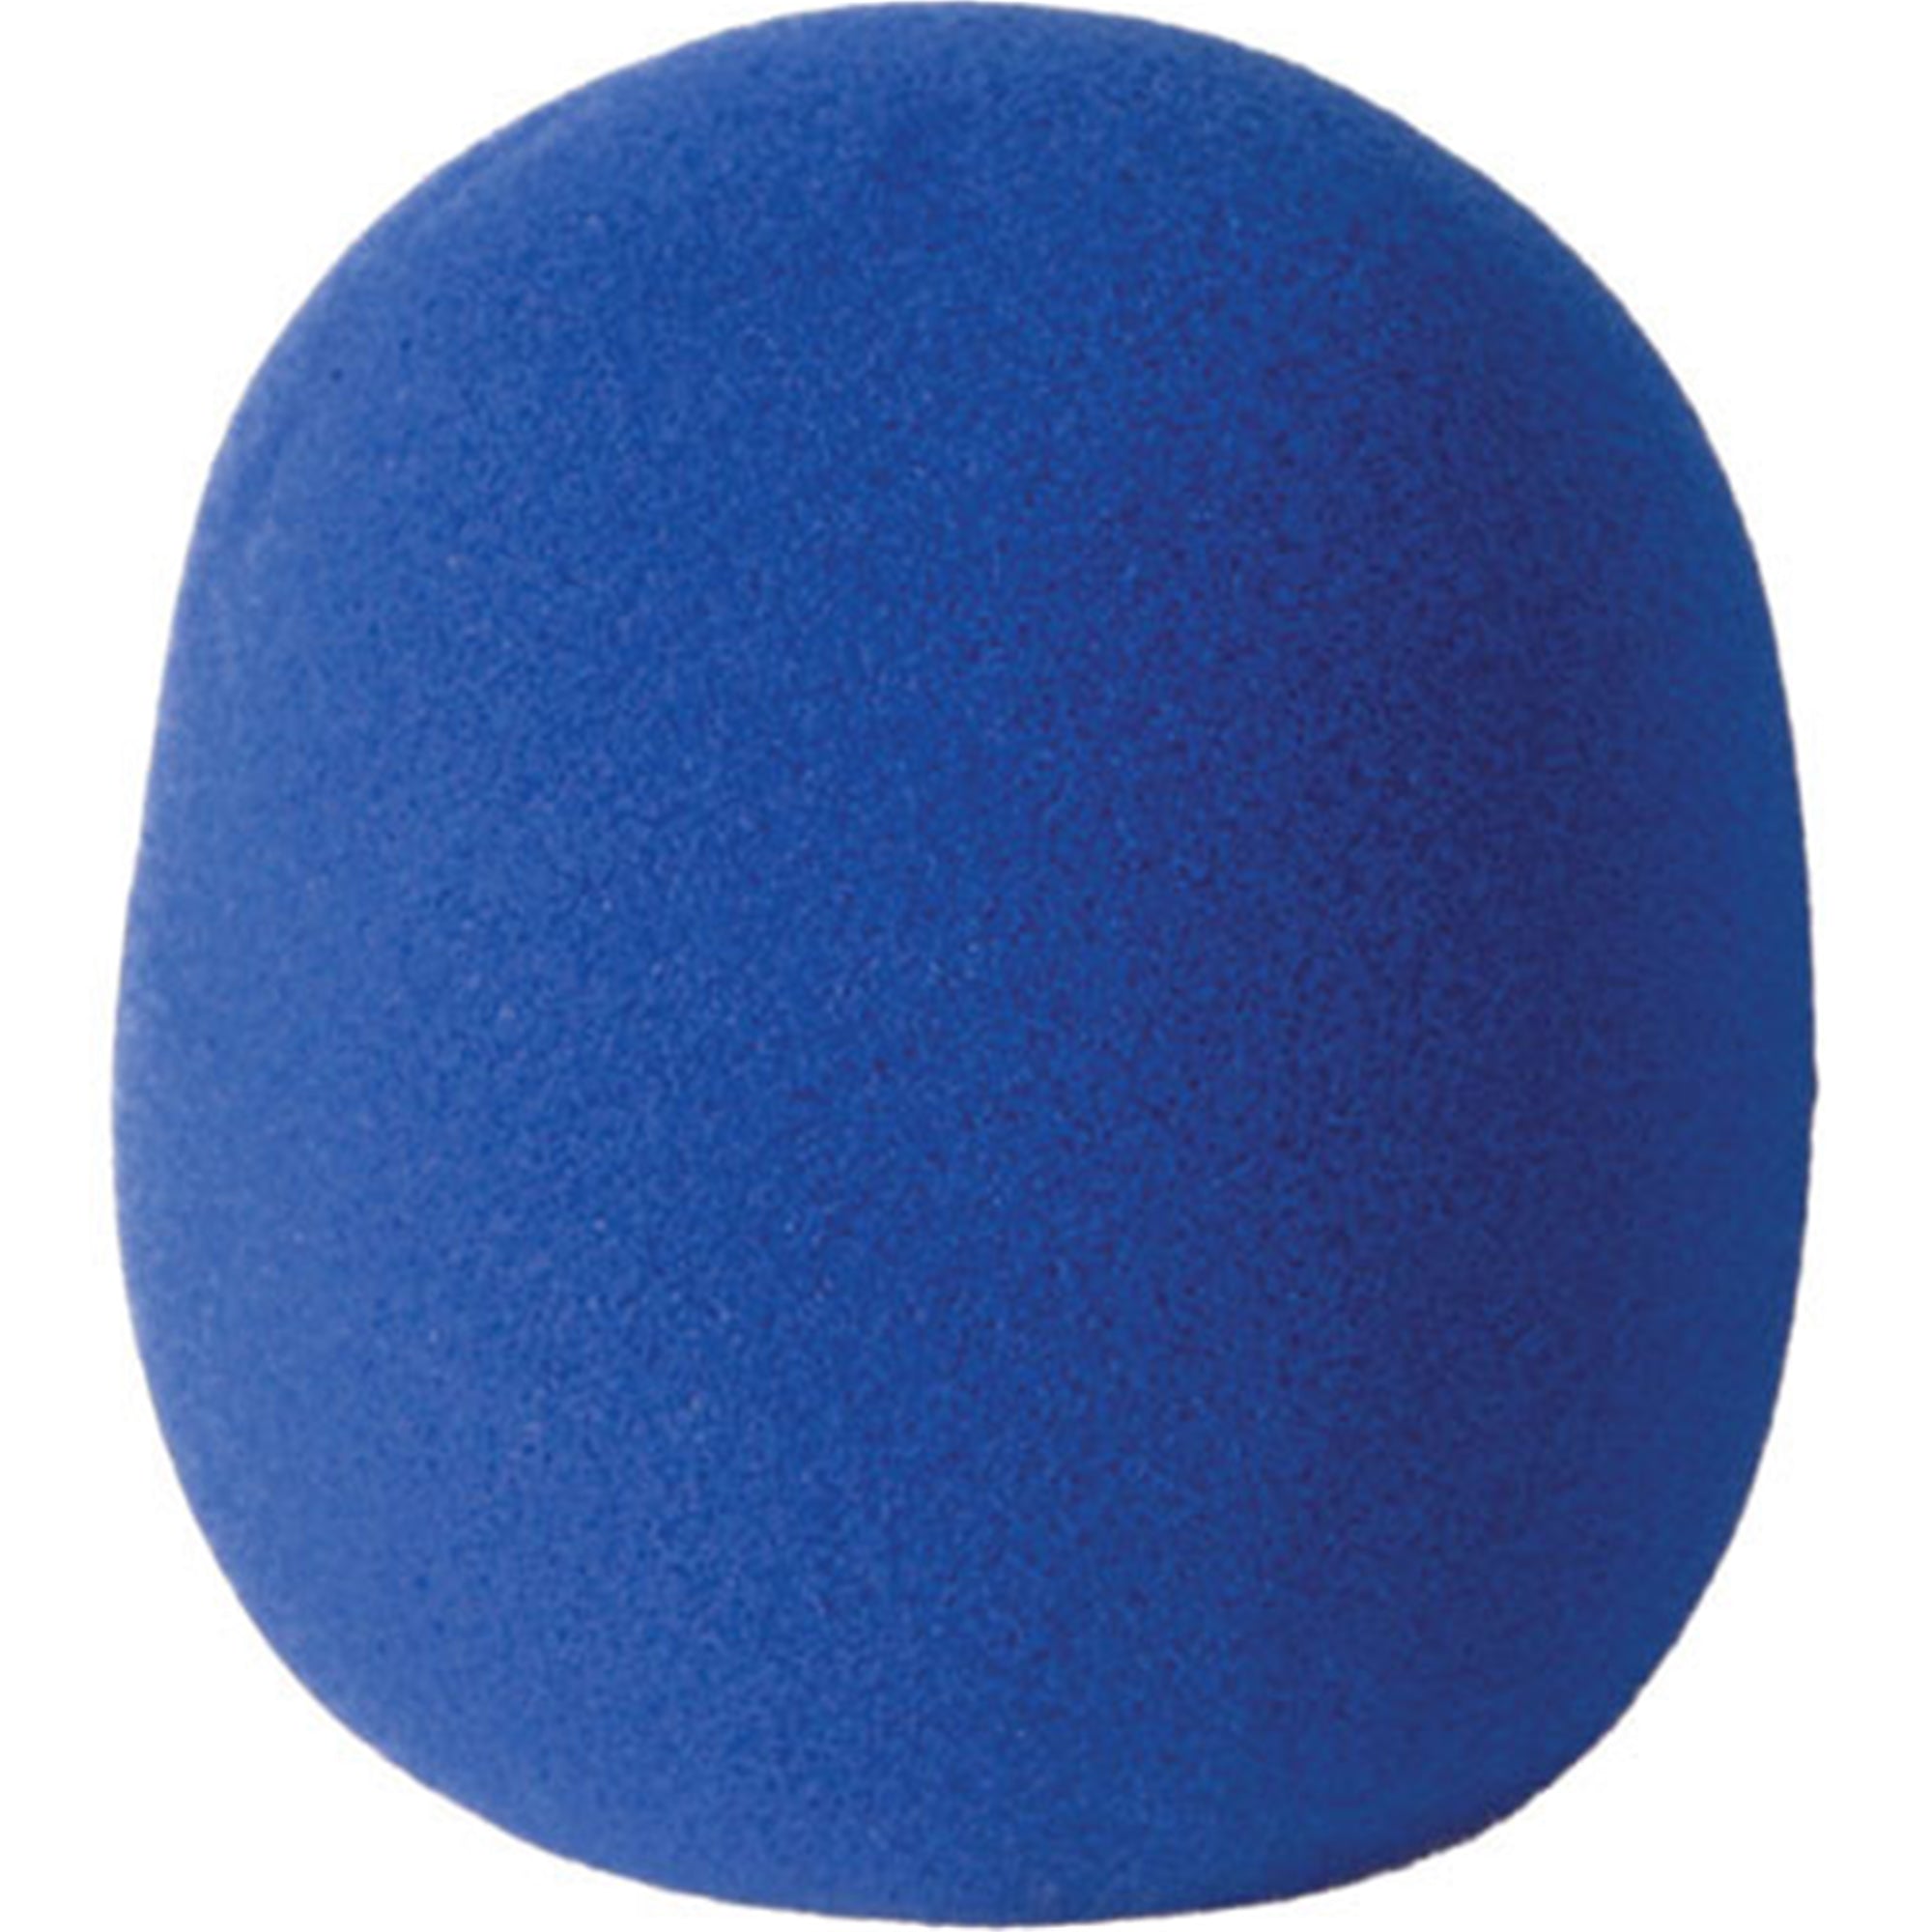 ON STAGE ASWS58BL Mic Windscreen Blue